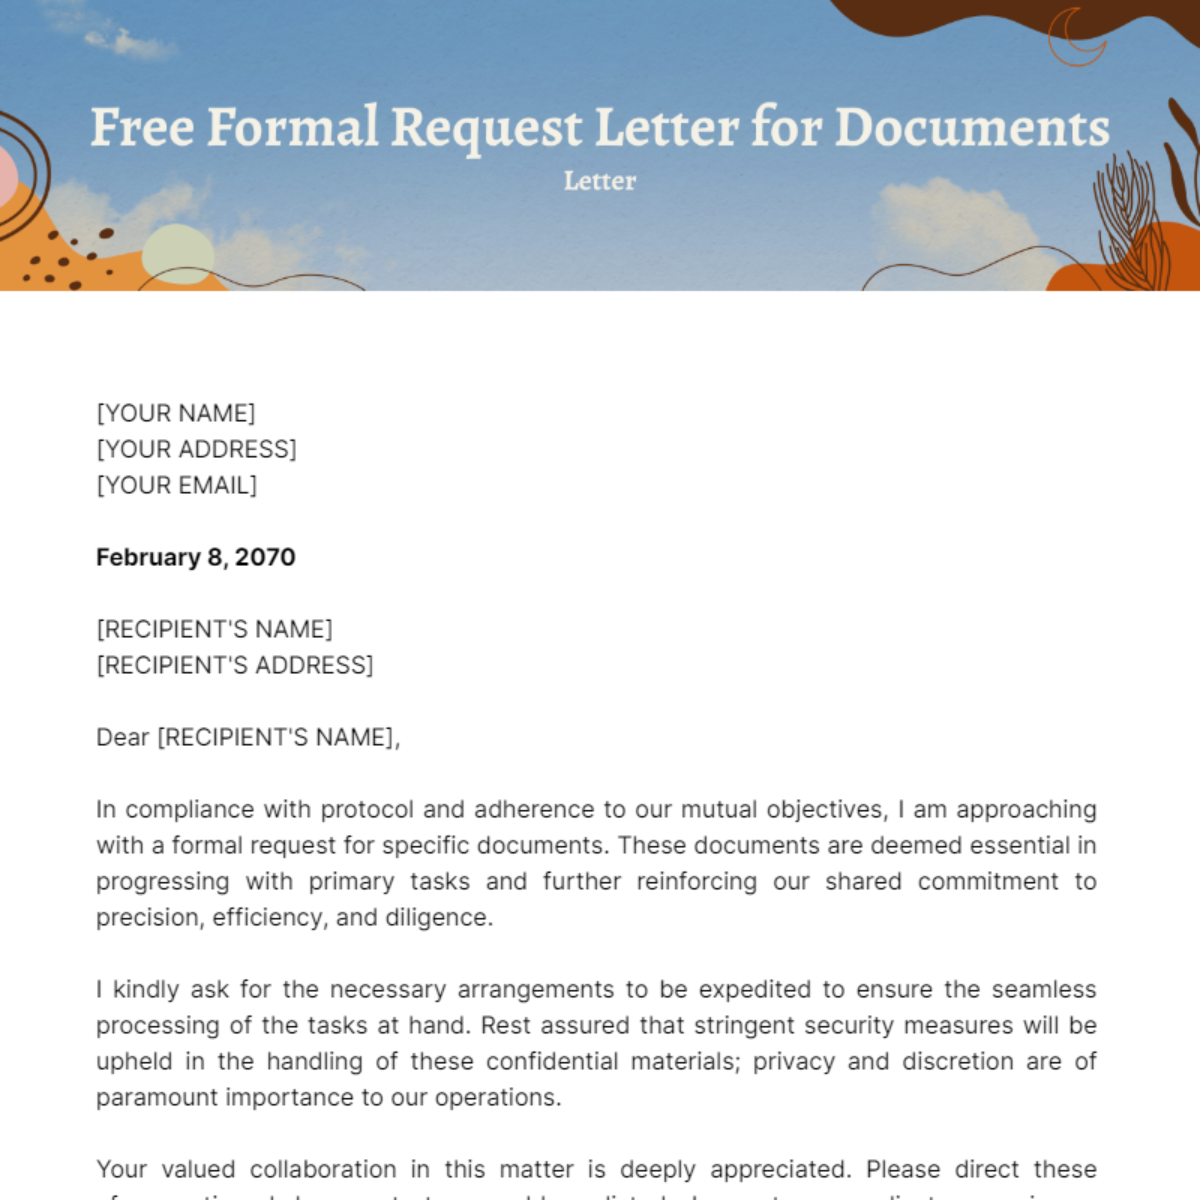 Formal Request Letter for Documents Template